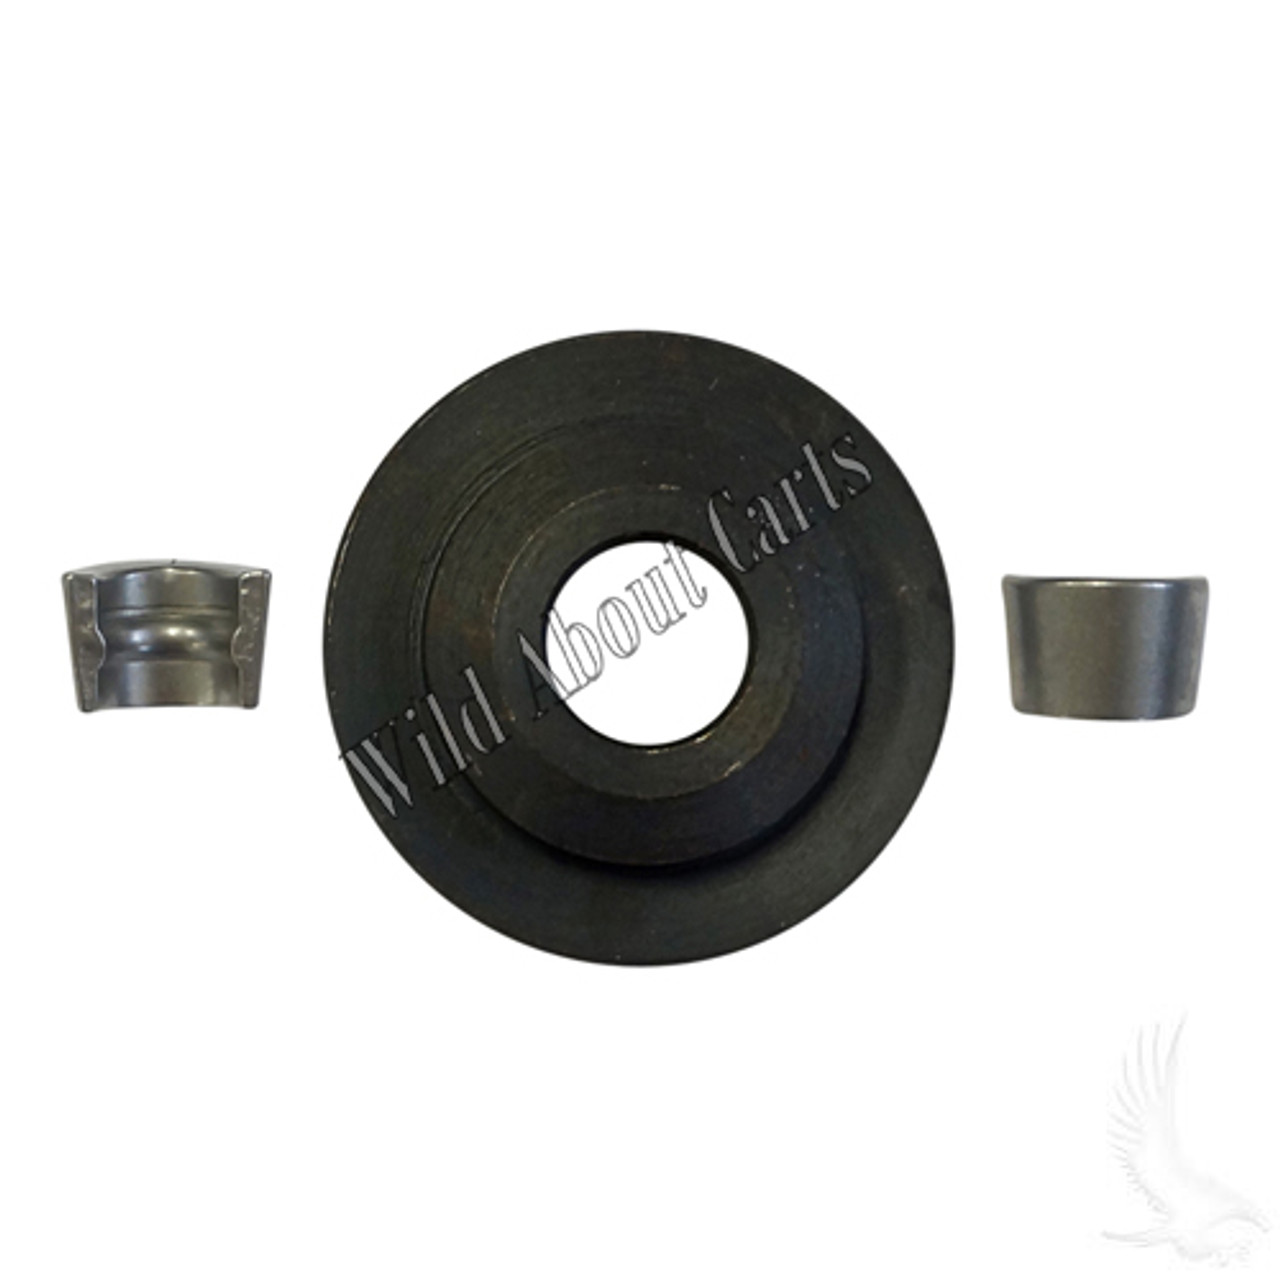 Valve Spring Retainer with Valve Collet for E-Z-Go Golf Carts, ENG-216, 72509G01, 72510G01 , 5557, 5572